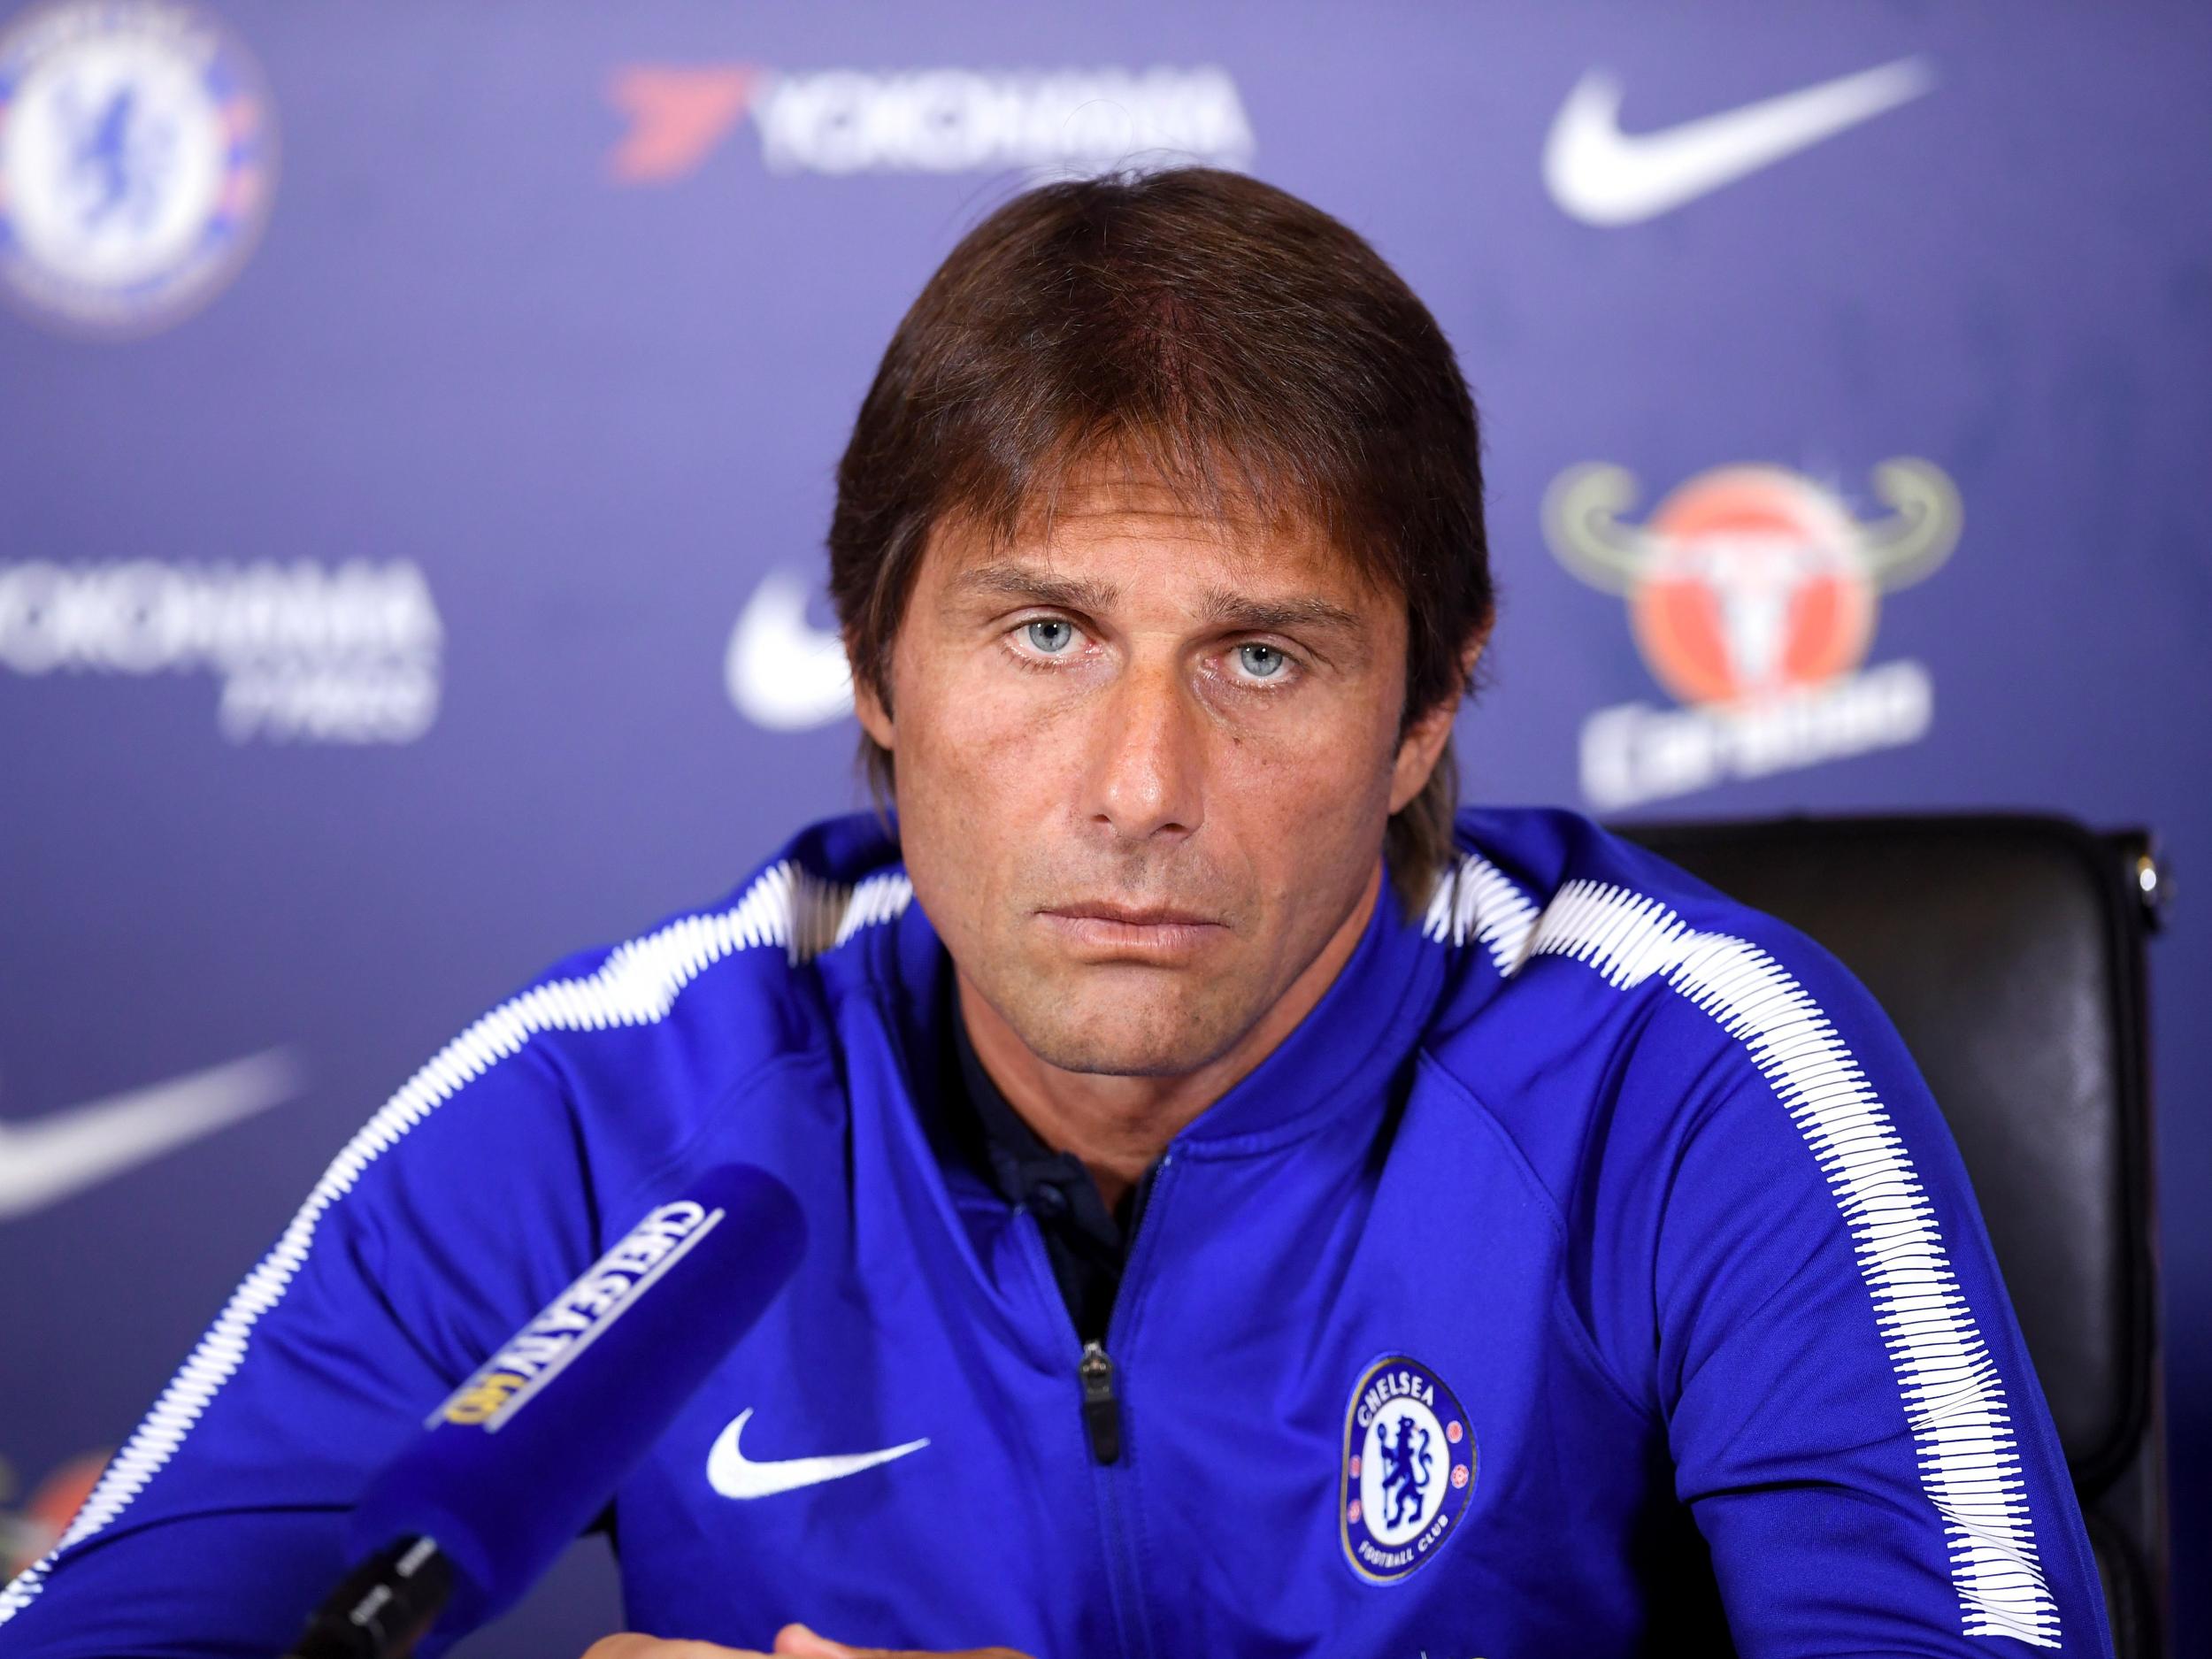 Antonio Conte can now concentrate on where he most likes to do the talking: the training ground